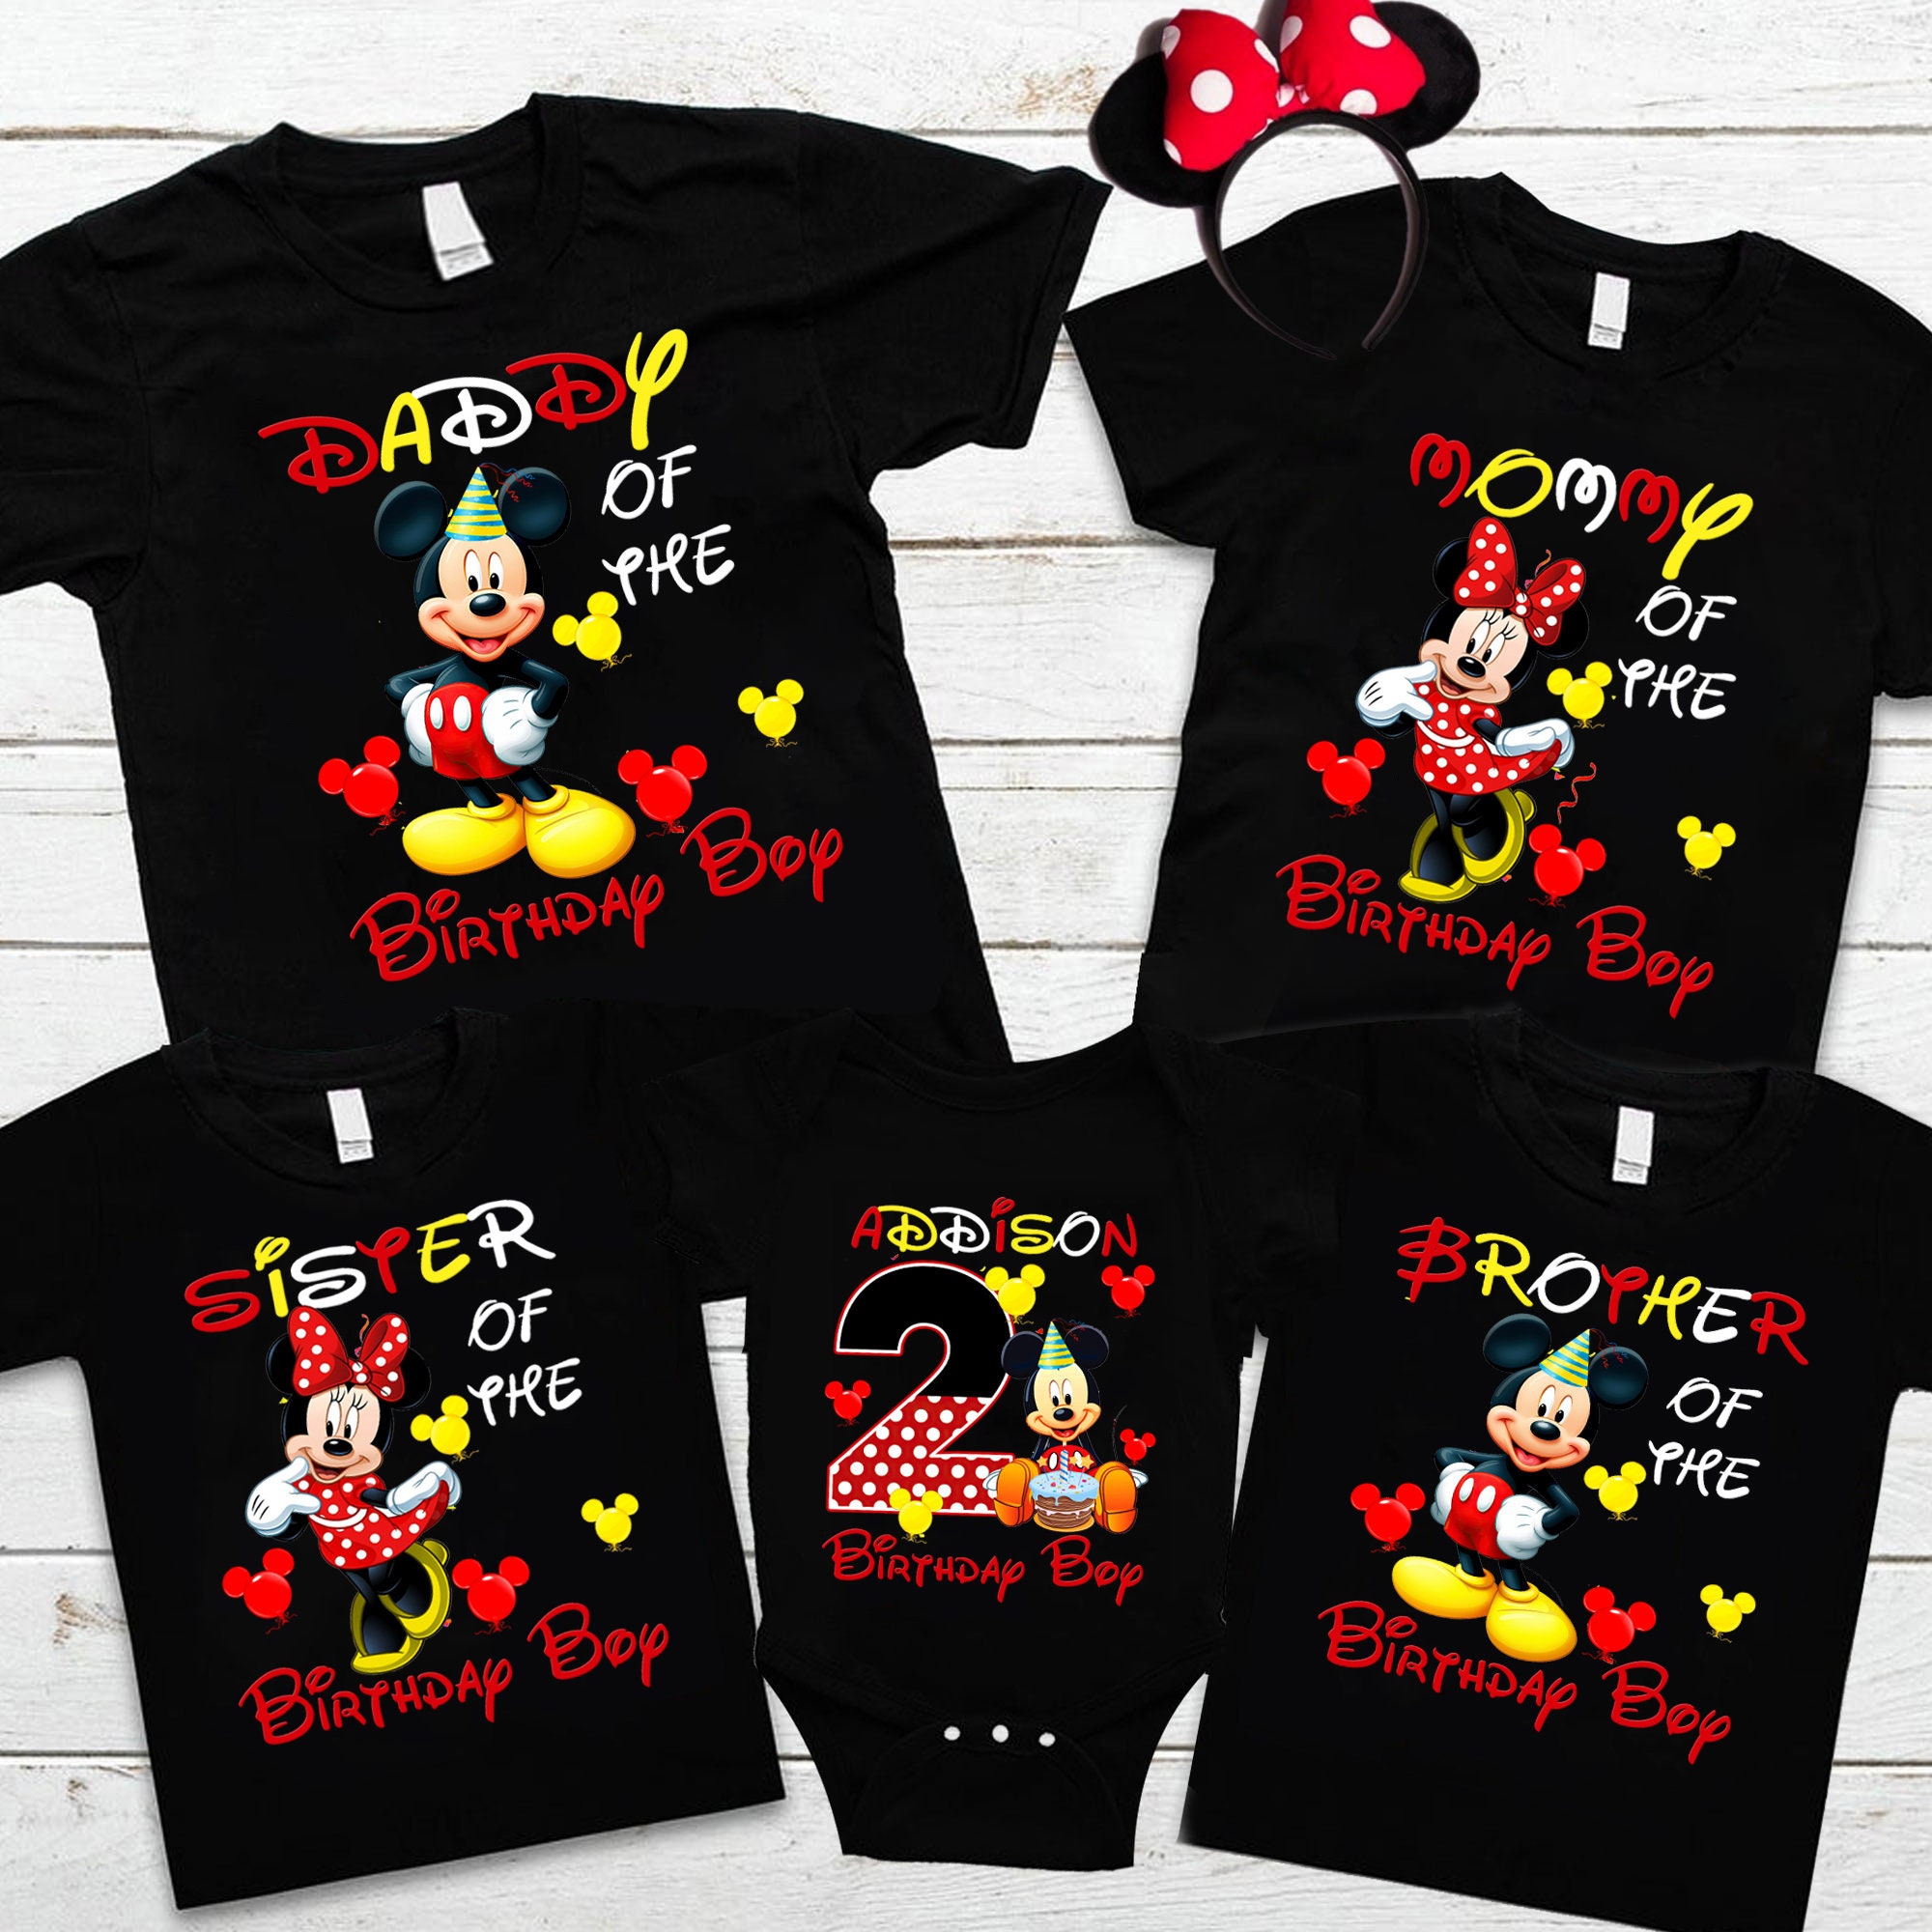 Discover T-shirt danniversaire Mickey Mouse, T-shirt danniversaire Mickey Mouse pour garçon, T-shirt danniversaire Mickey, T-shirts de famille assortis